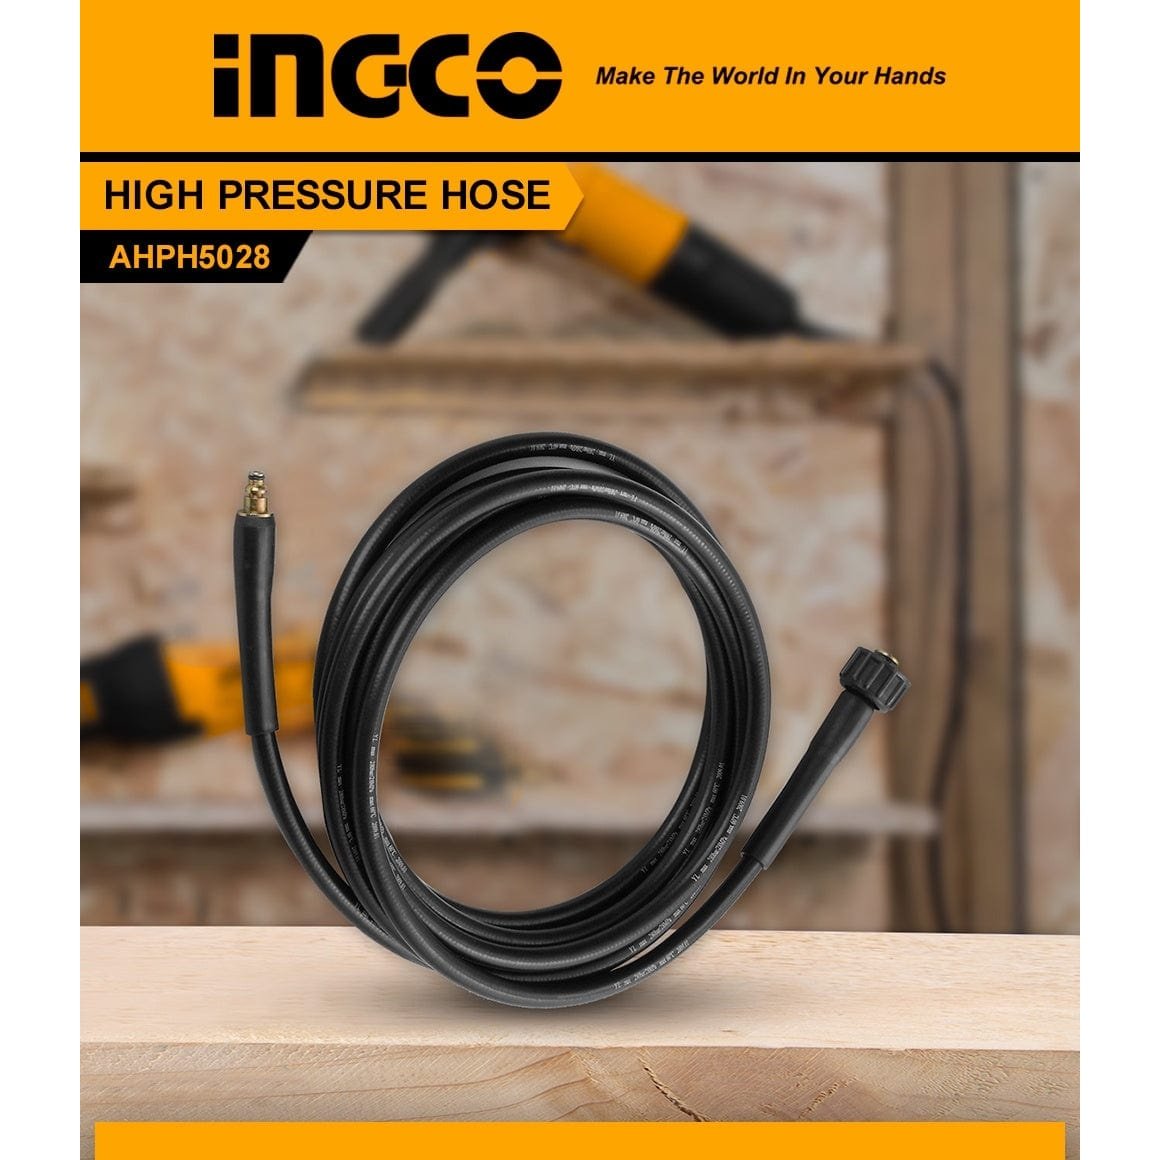 Ingco High Pressure Hose (Quick Connector) - AHPH5028 - Buy Online in Accra, Ghana at Supply Master Cleaning Equipment Accessories Buy Tools hardware Building materials